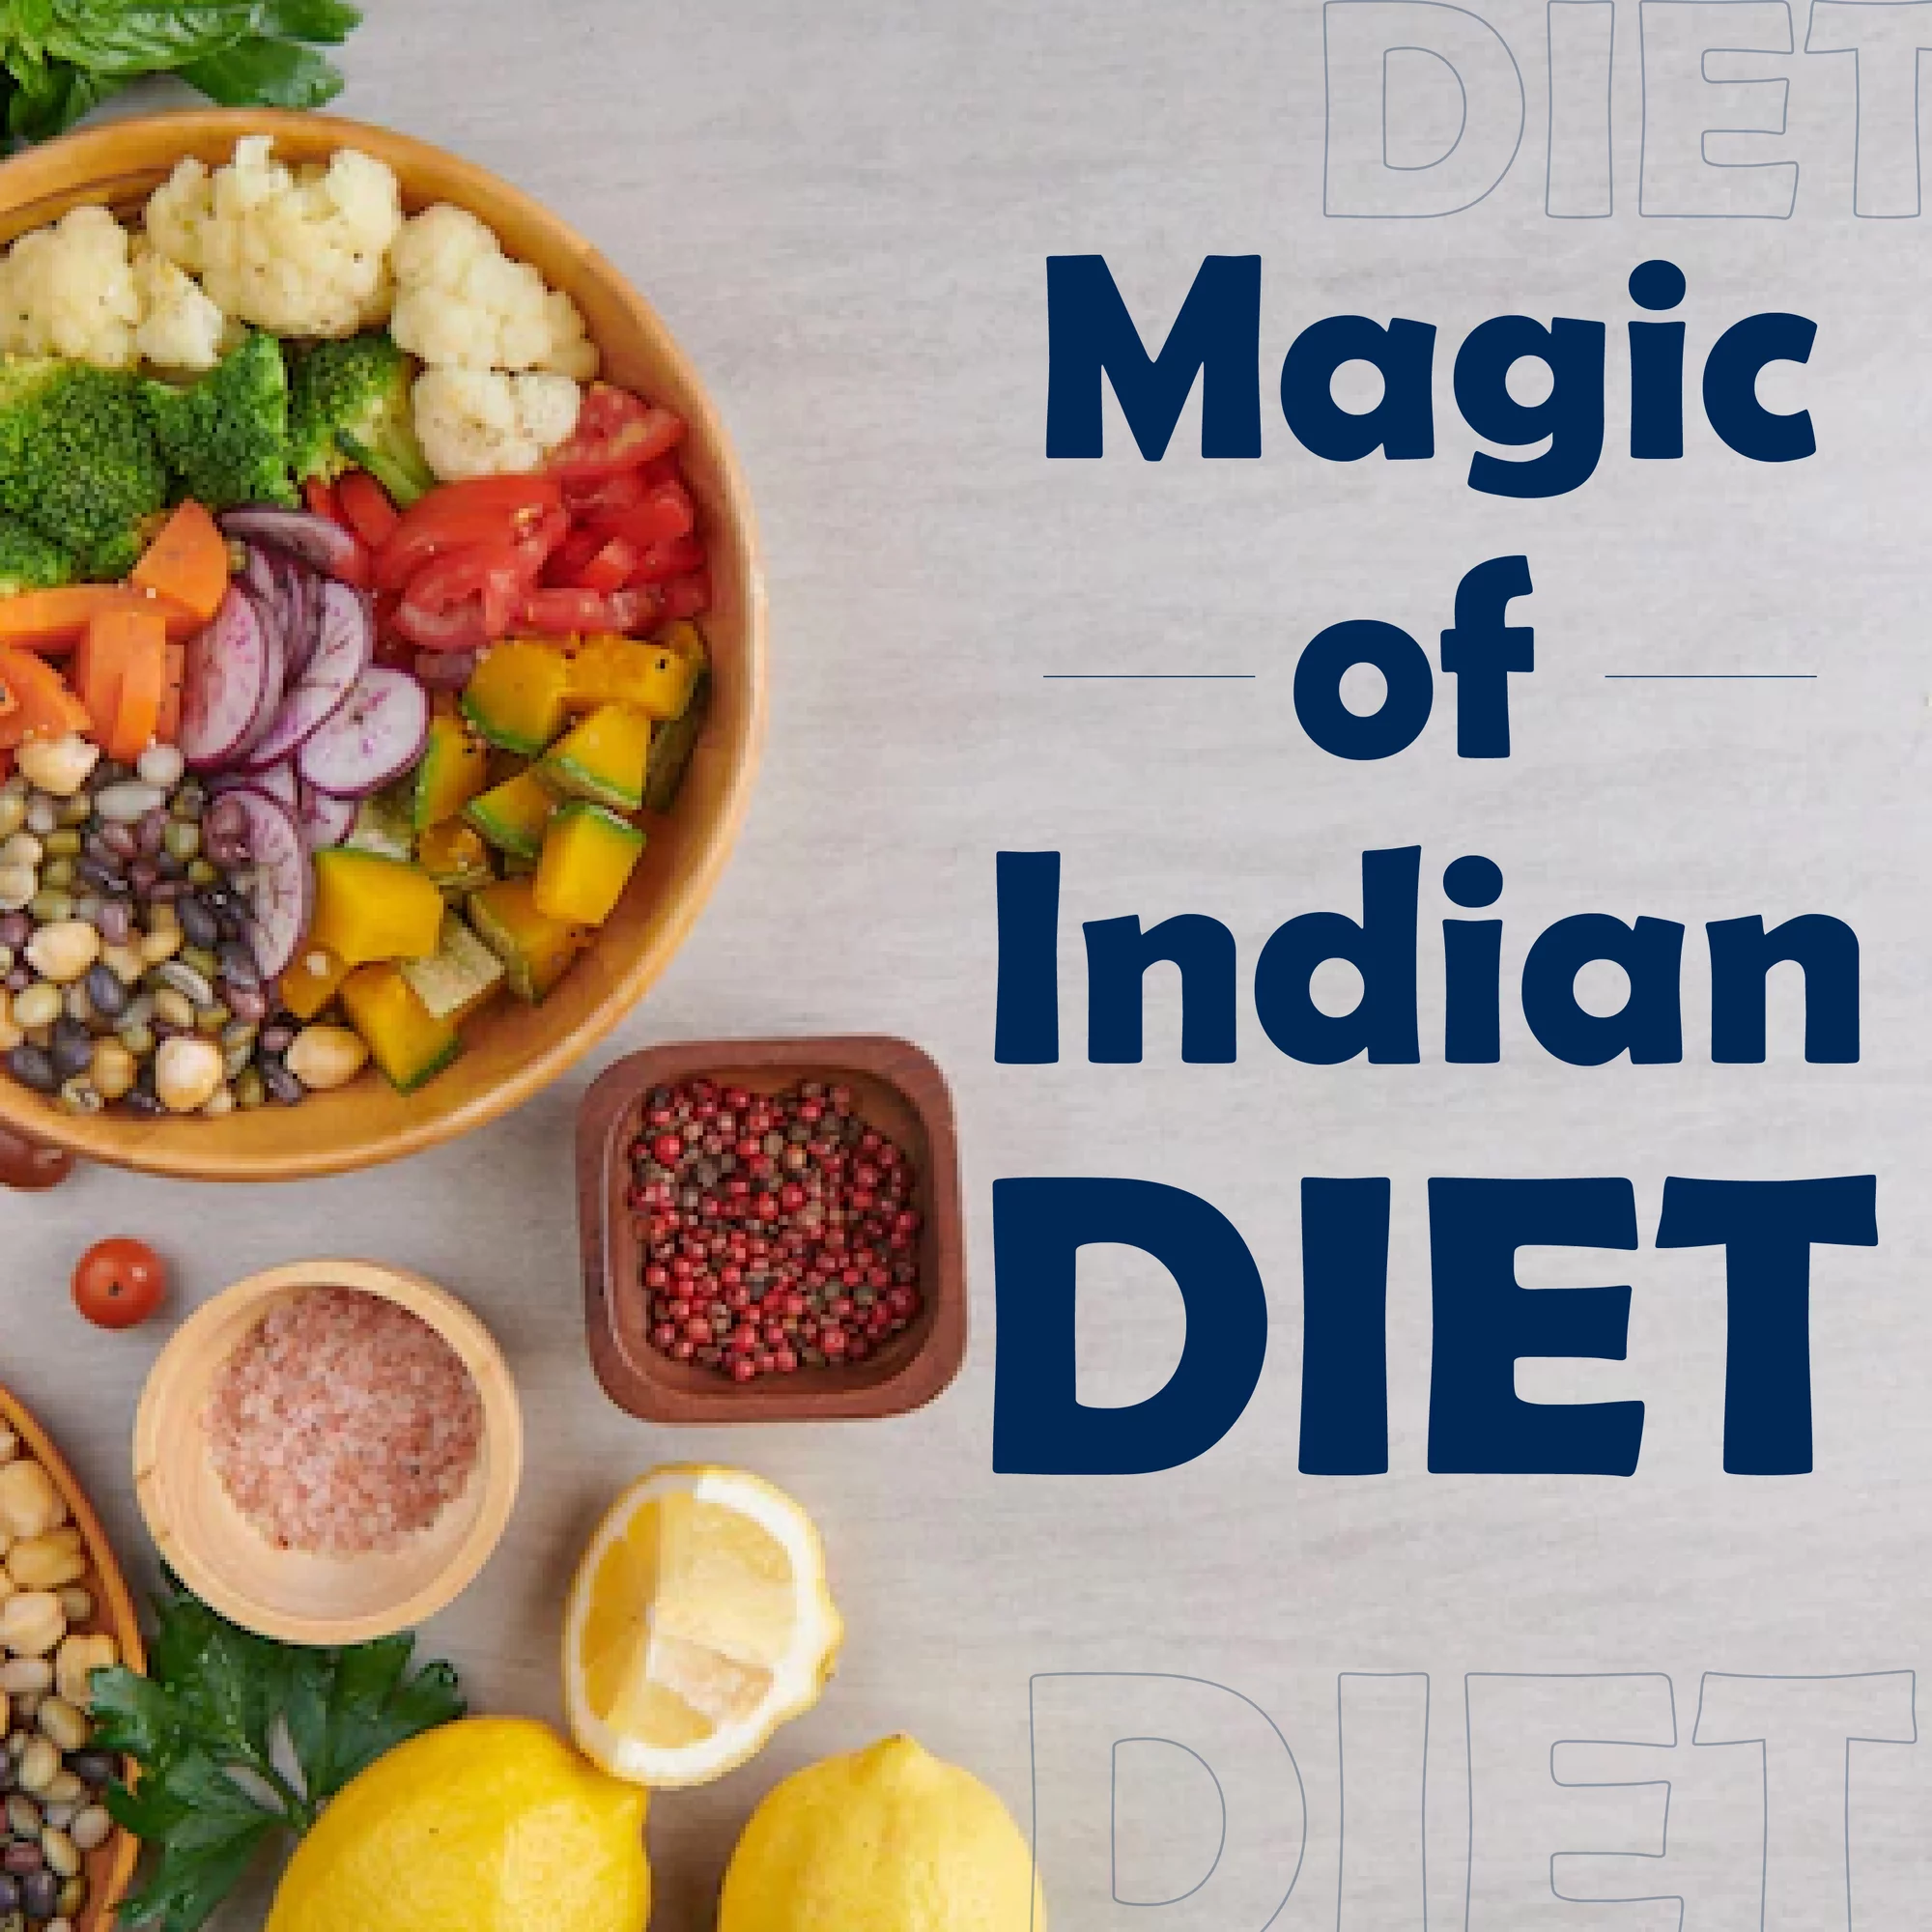 03. The Great Indian Diet kya hai ?.